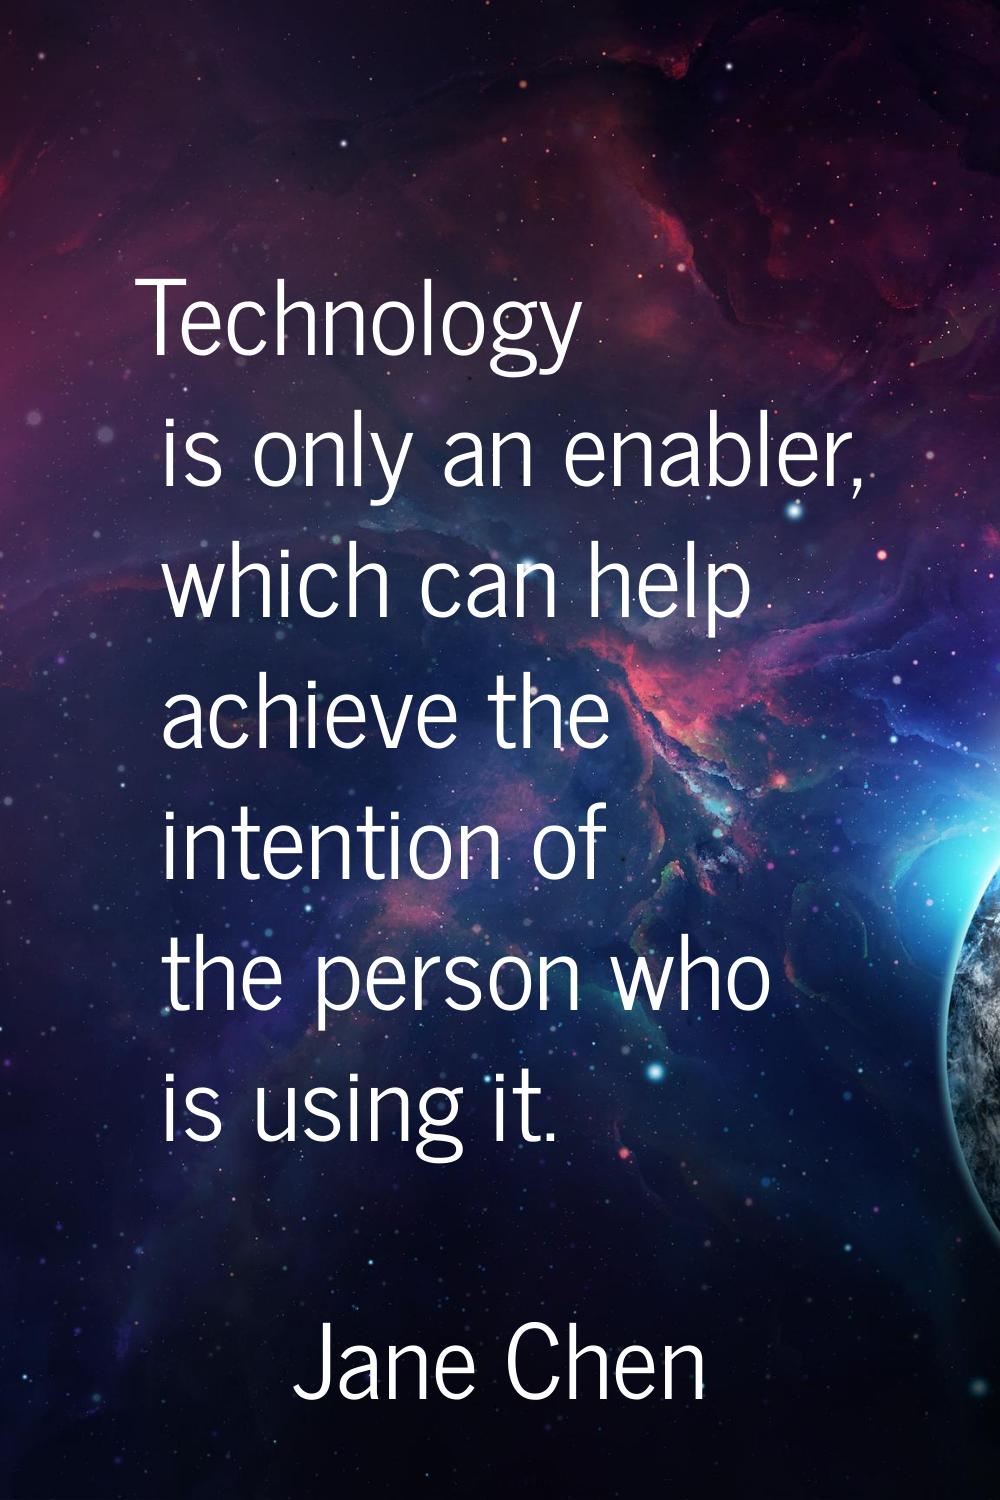 Technology is only an enabler, which can help achieve the intention of the person who is using it.